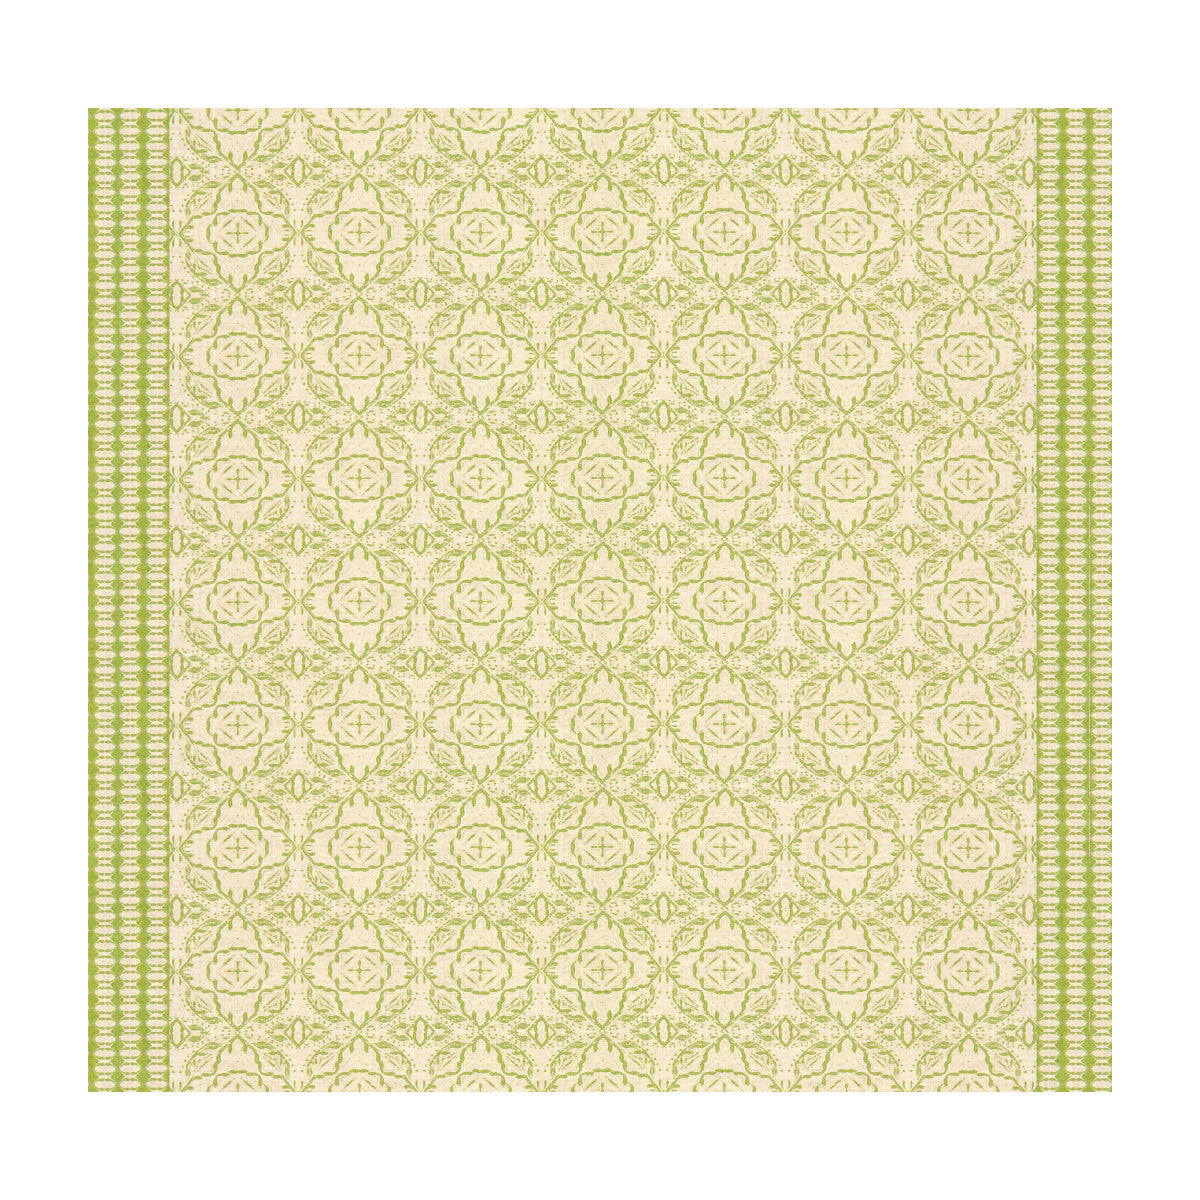 Maze fabric in meadow color - pattern GWF-3506.3.0 - by Lee Jofa Modern in the Allegra Hicks Garden collection